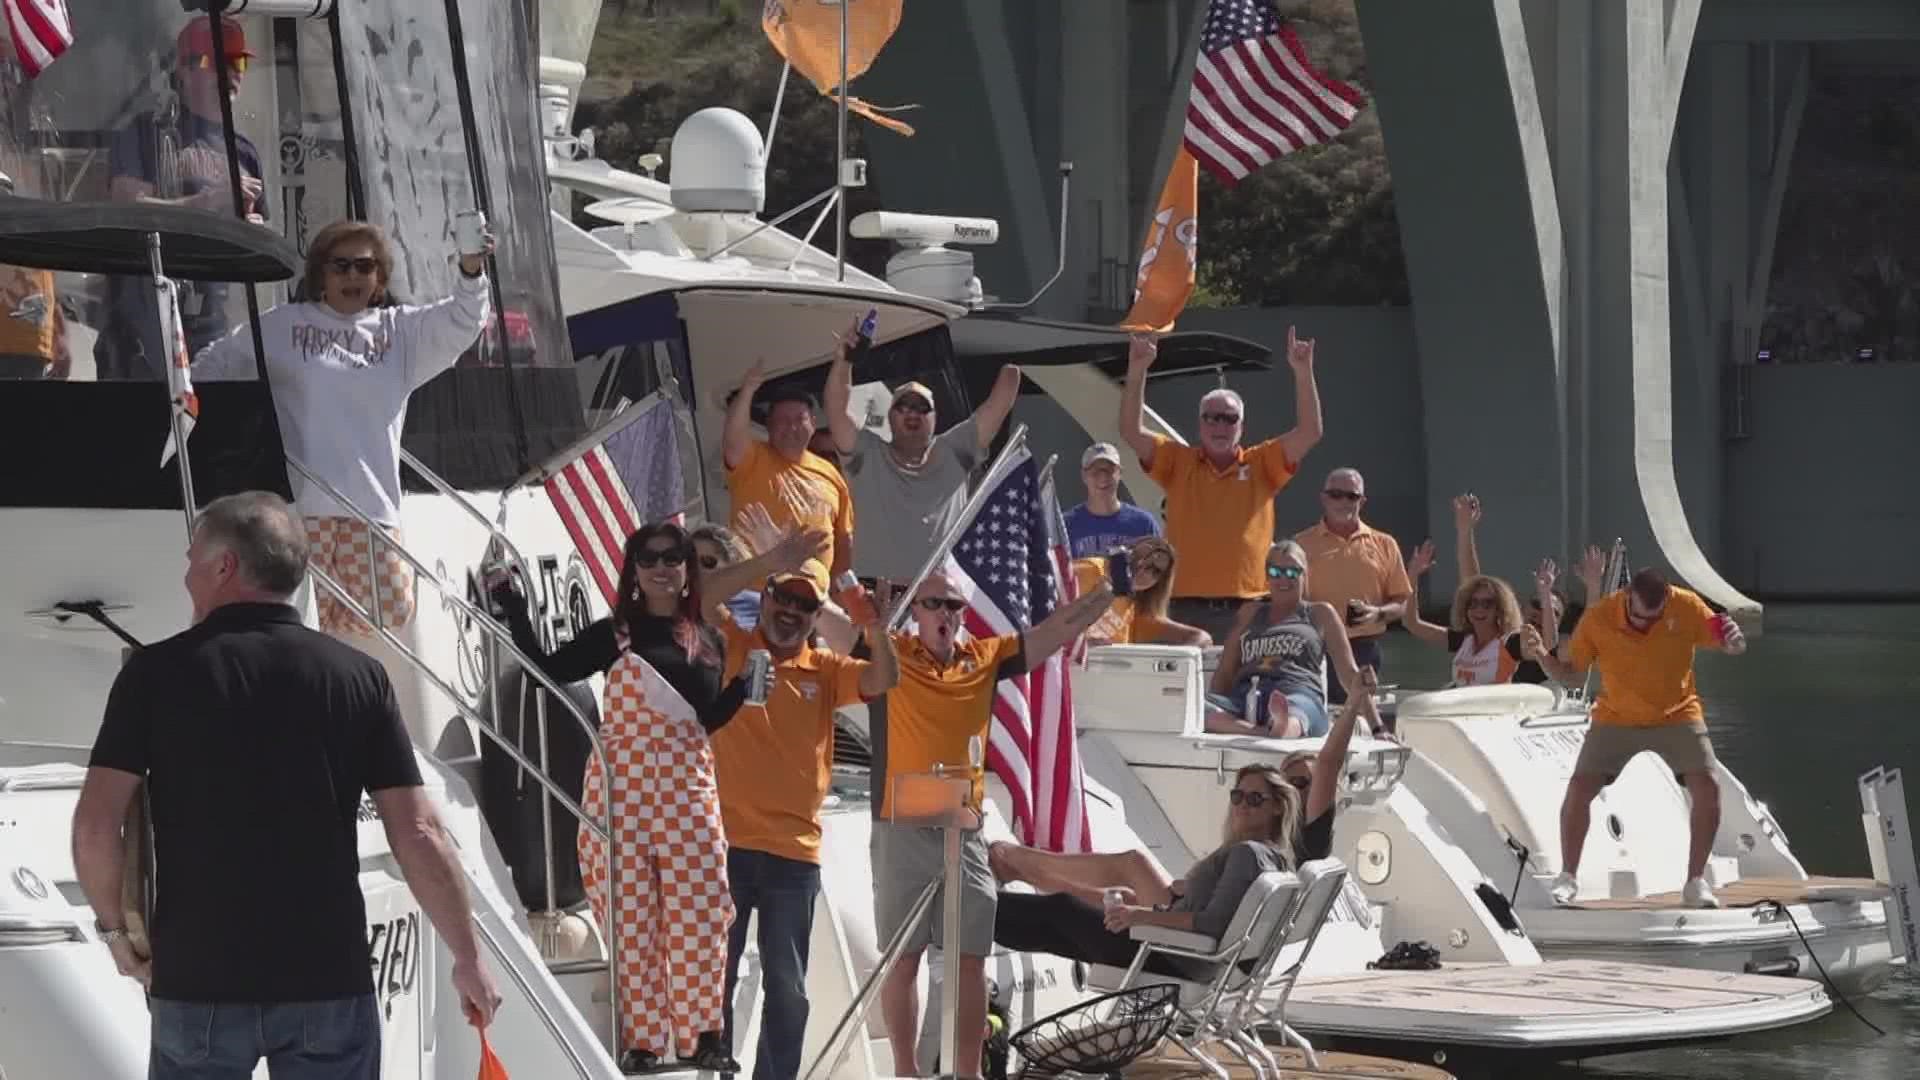 It was a beautiful day to "sailgate" on the Tennessee River. For 60 years, boaters have gathered to party and cheer on the Big Orange from the water.